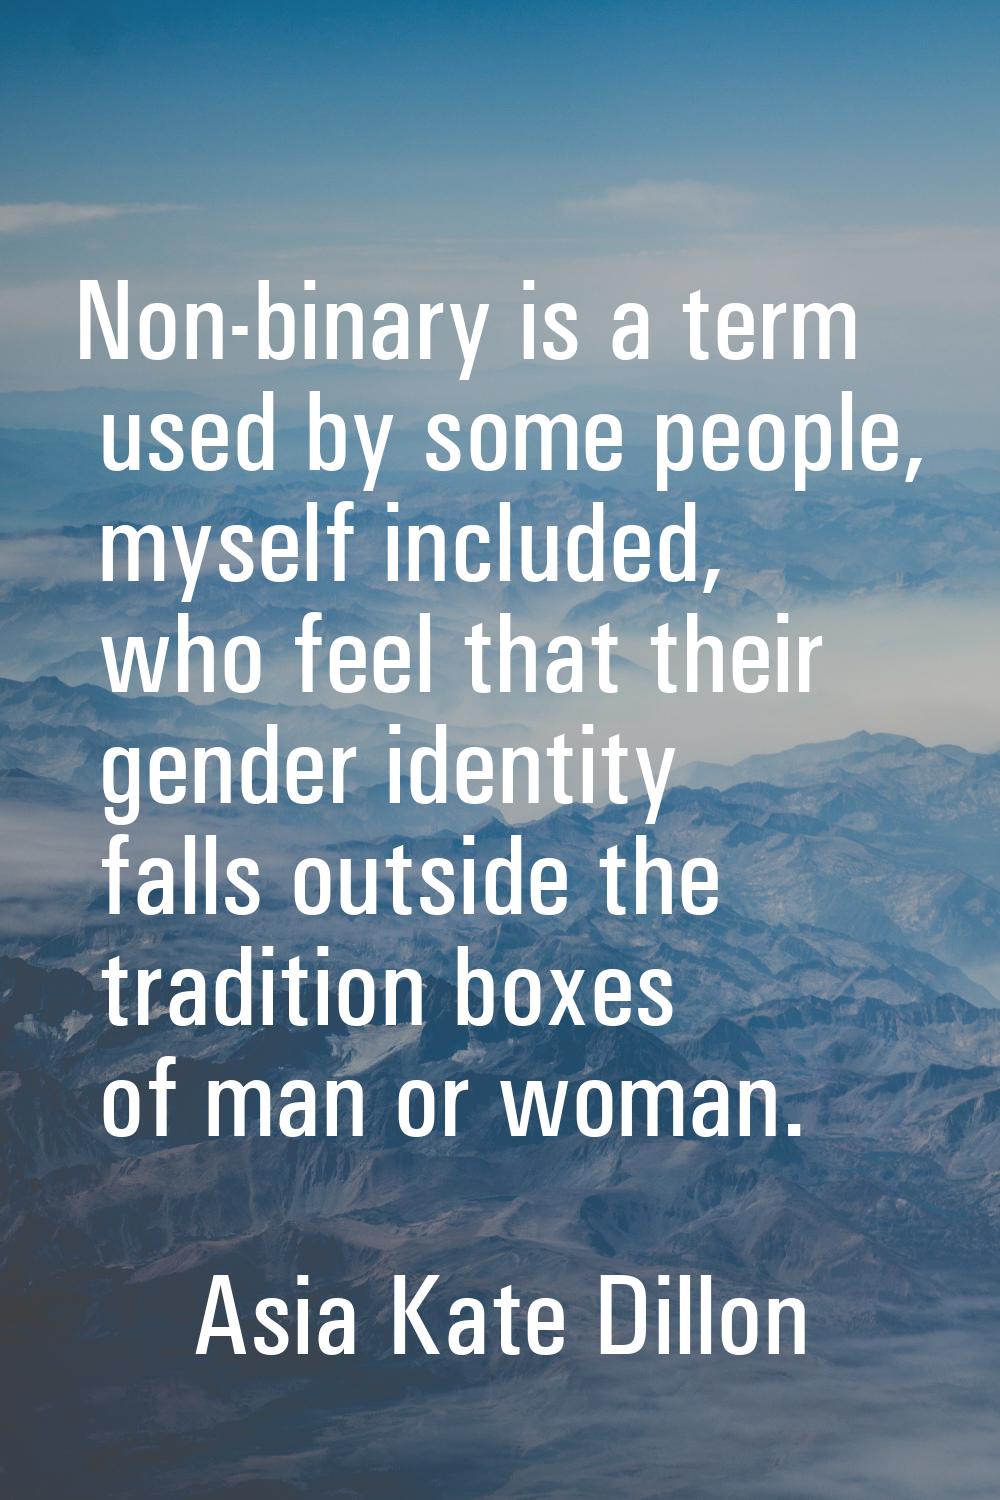 Non-binary is a term used by some people, myself included, who feel that their gender identity fall